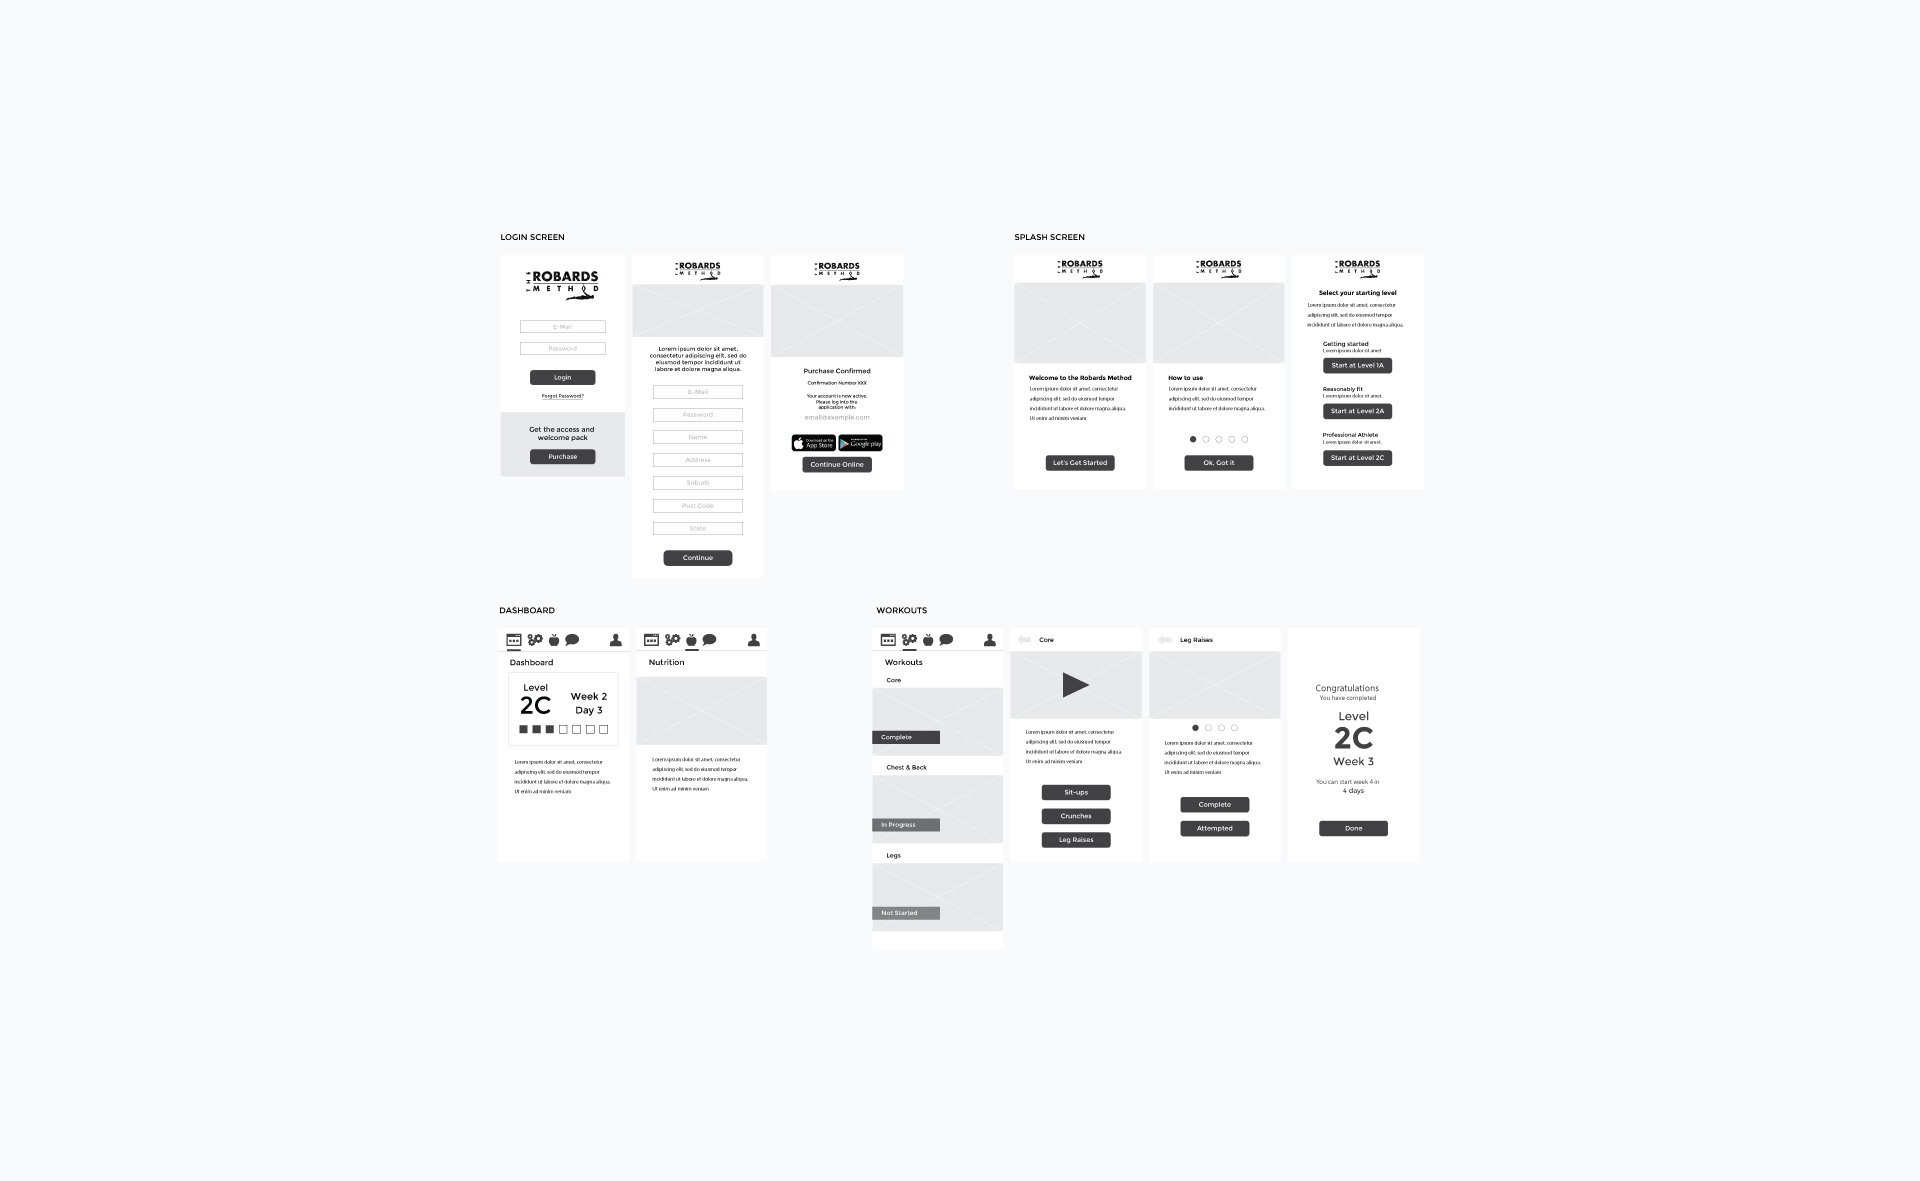 Wireframes for the home page of the website